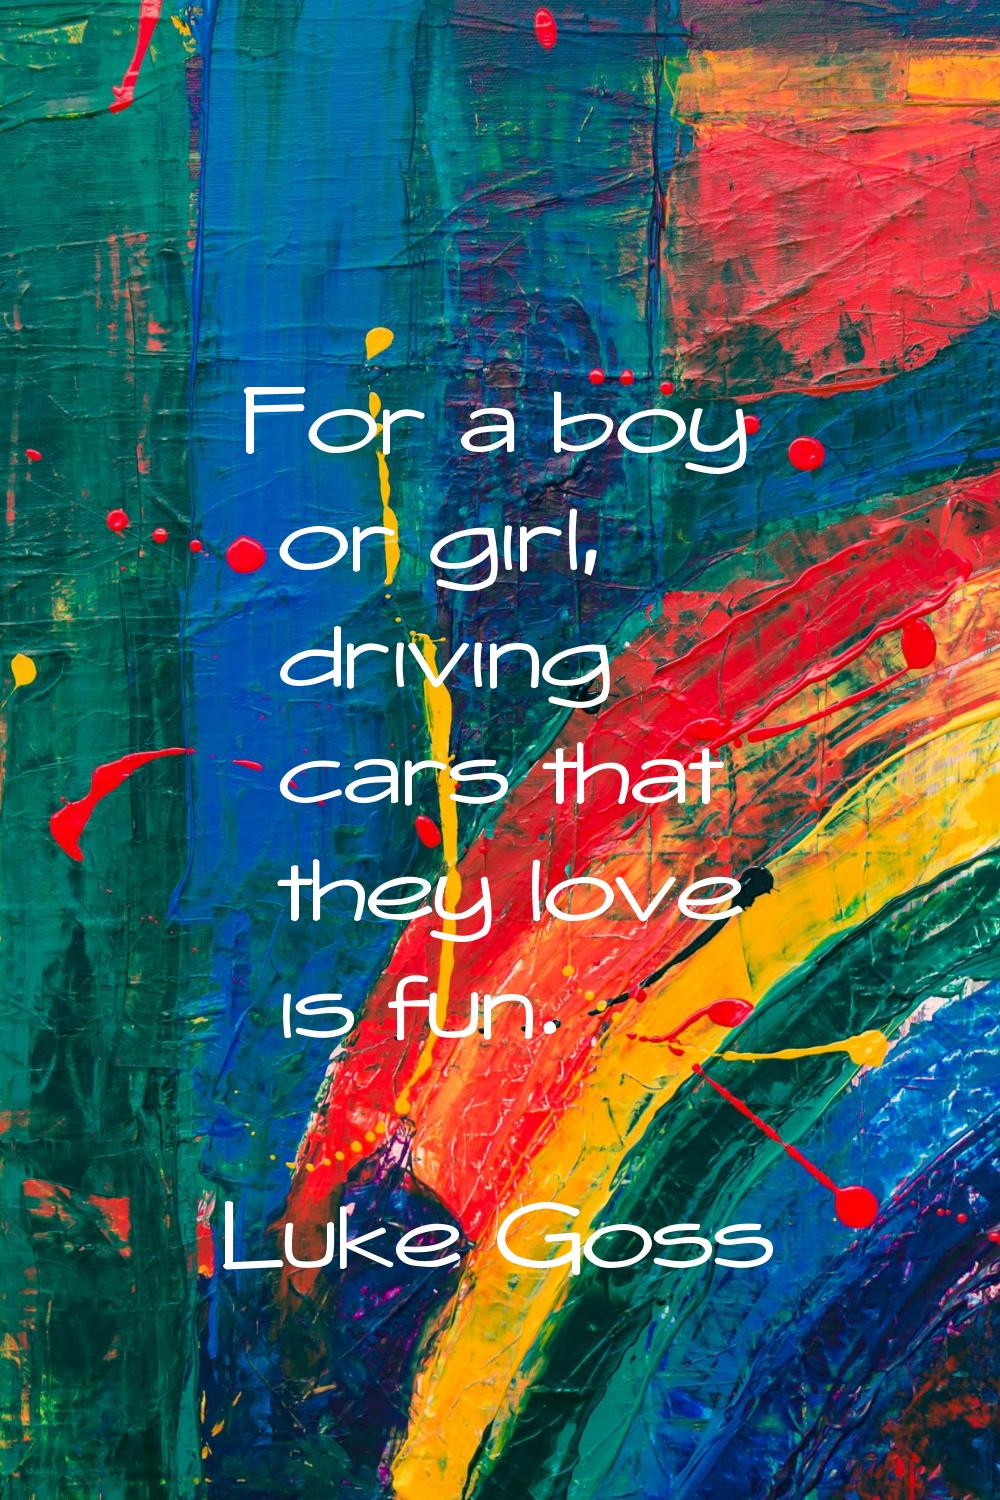 For a boy or girl, driving cars that they love is fun.